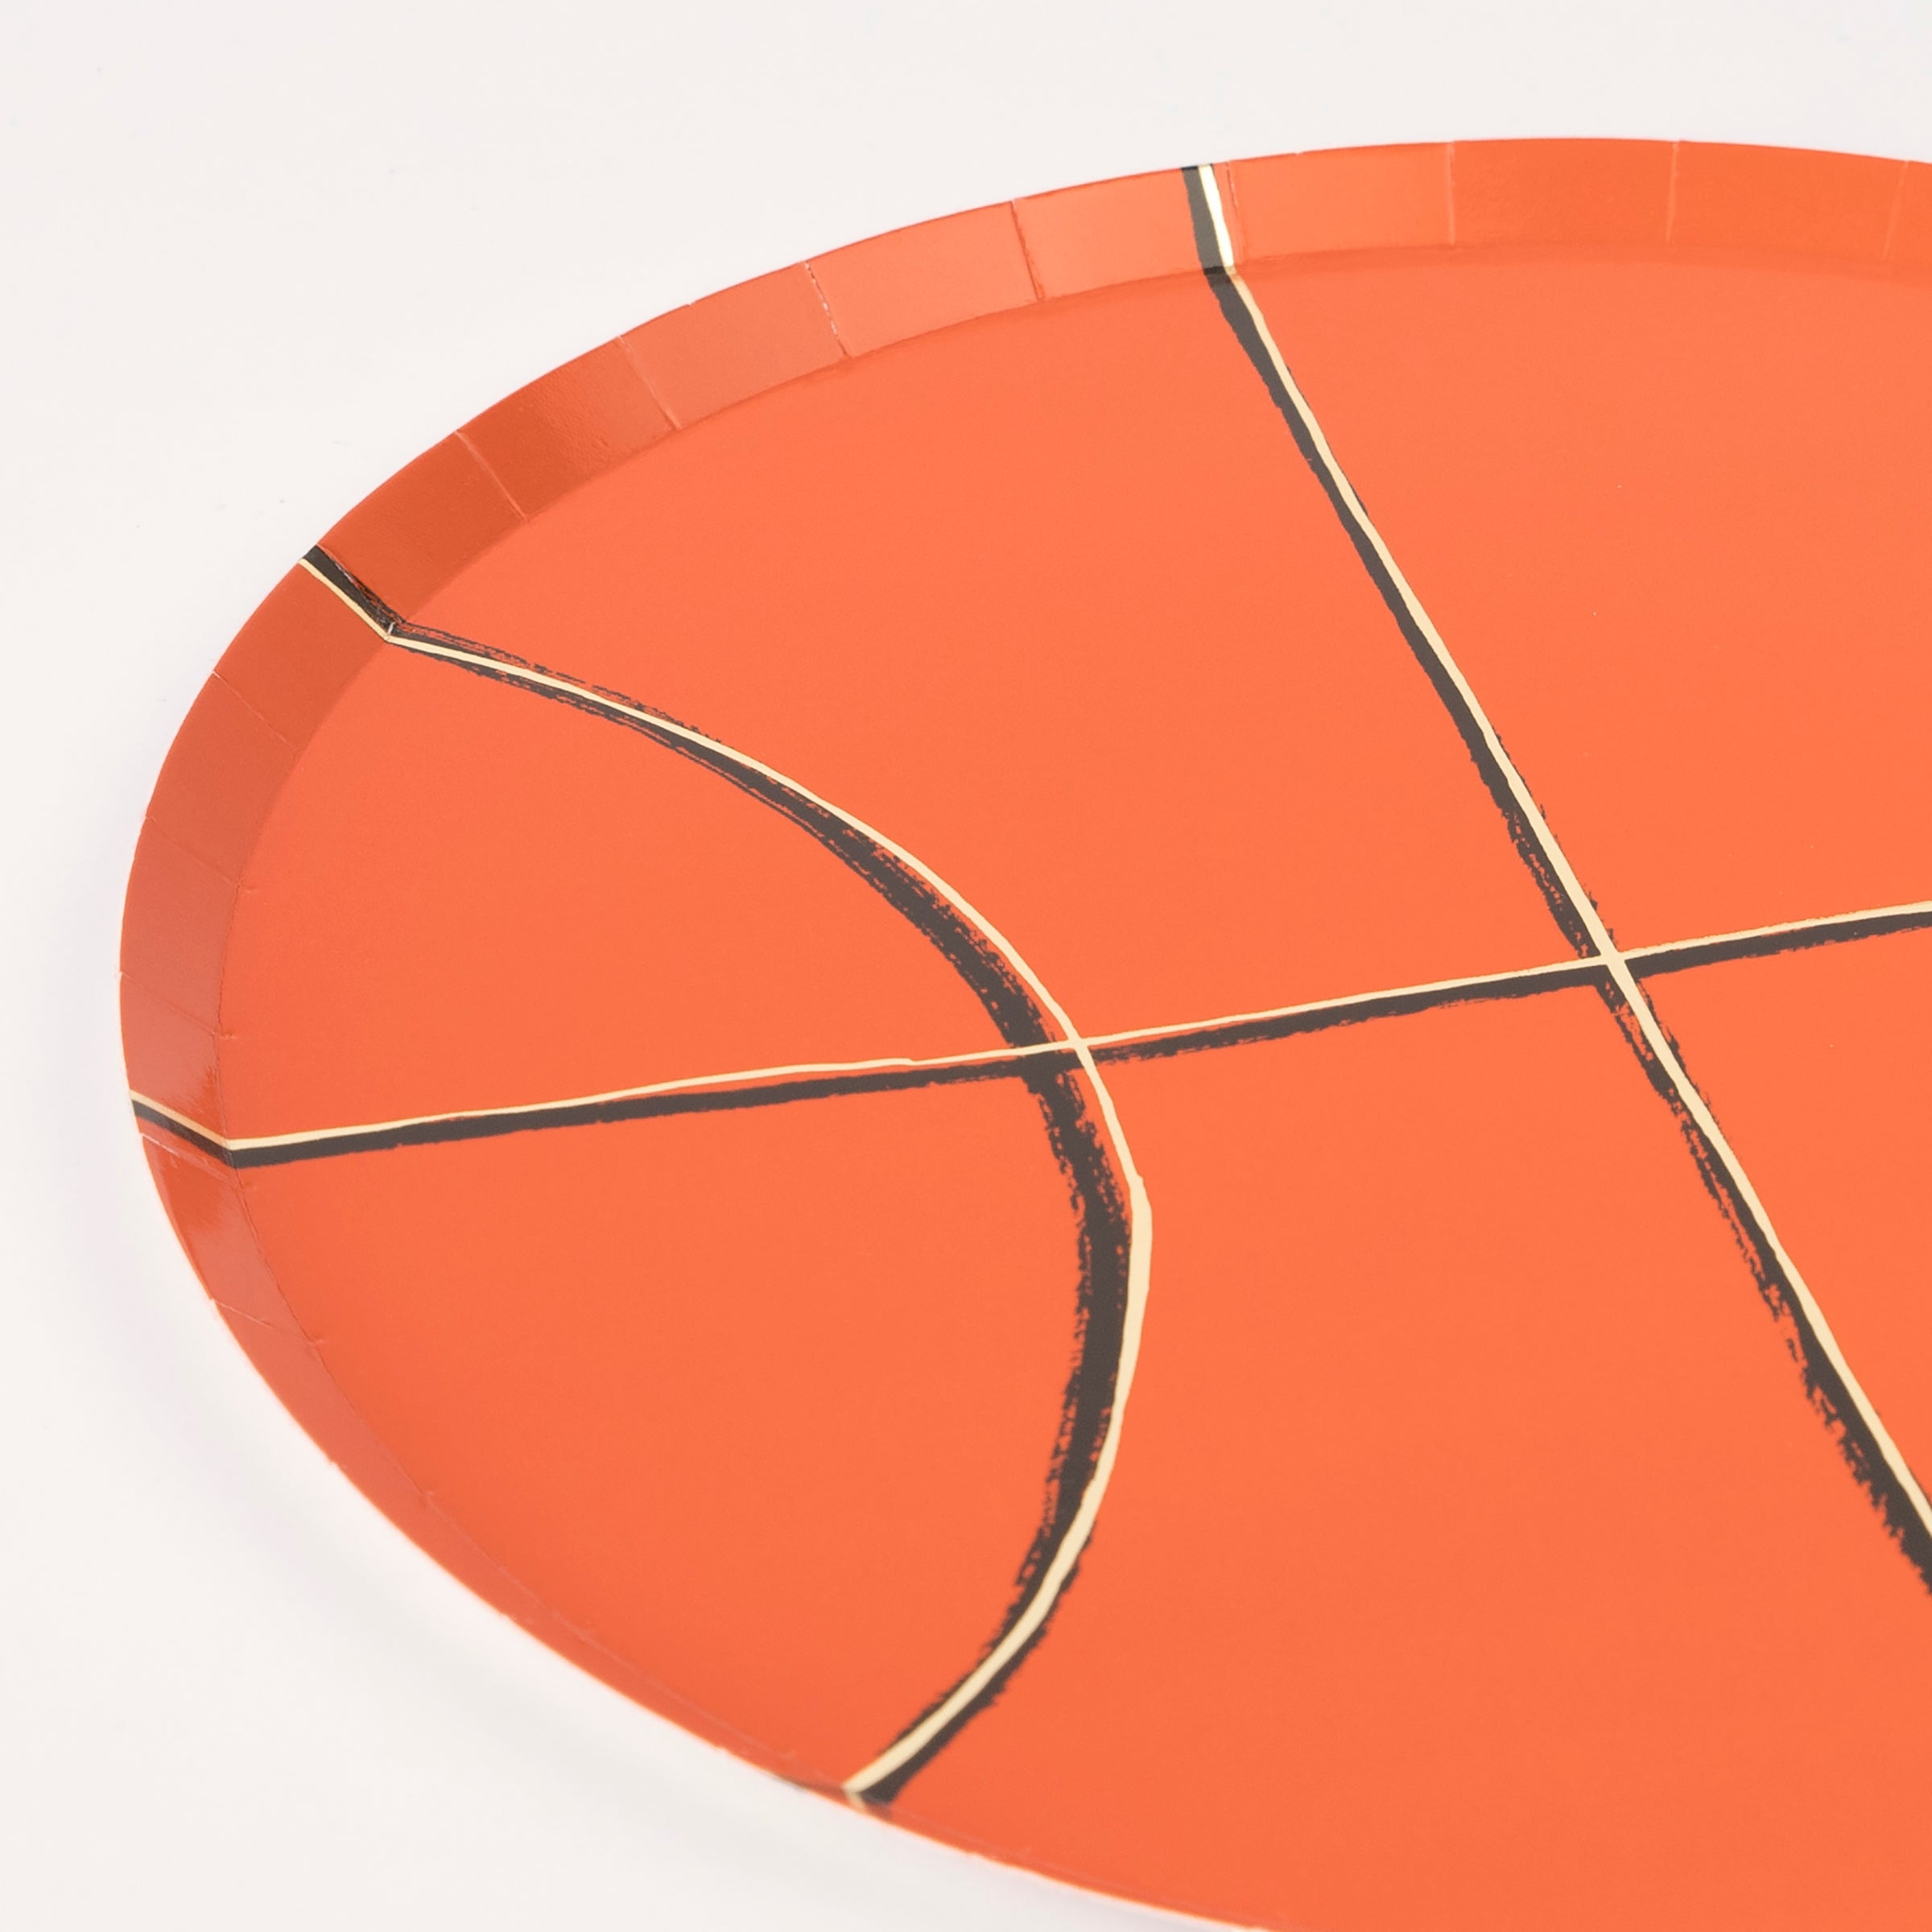 Our party plates, in the shape of a basketball with gold foil details, are perfect for basketball party supplies.